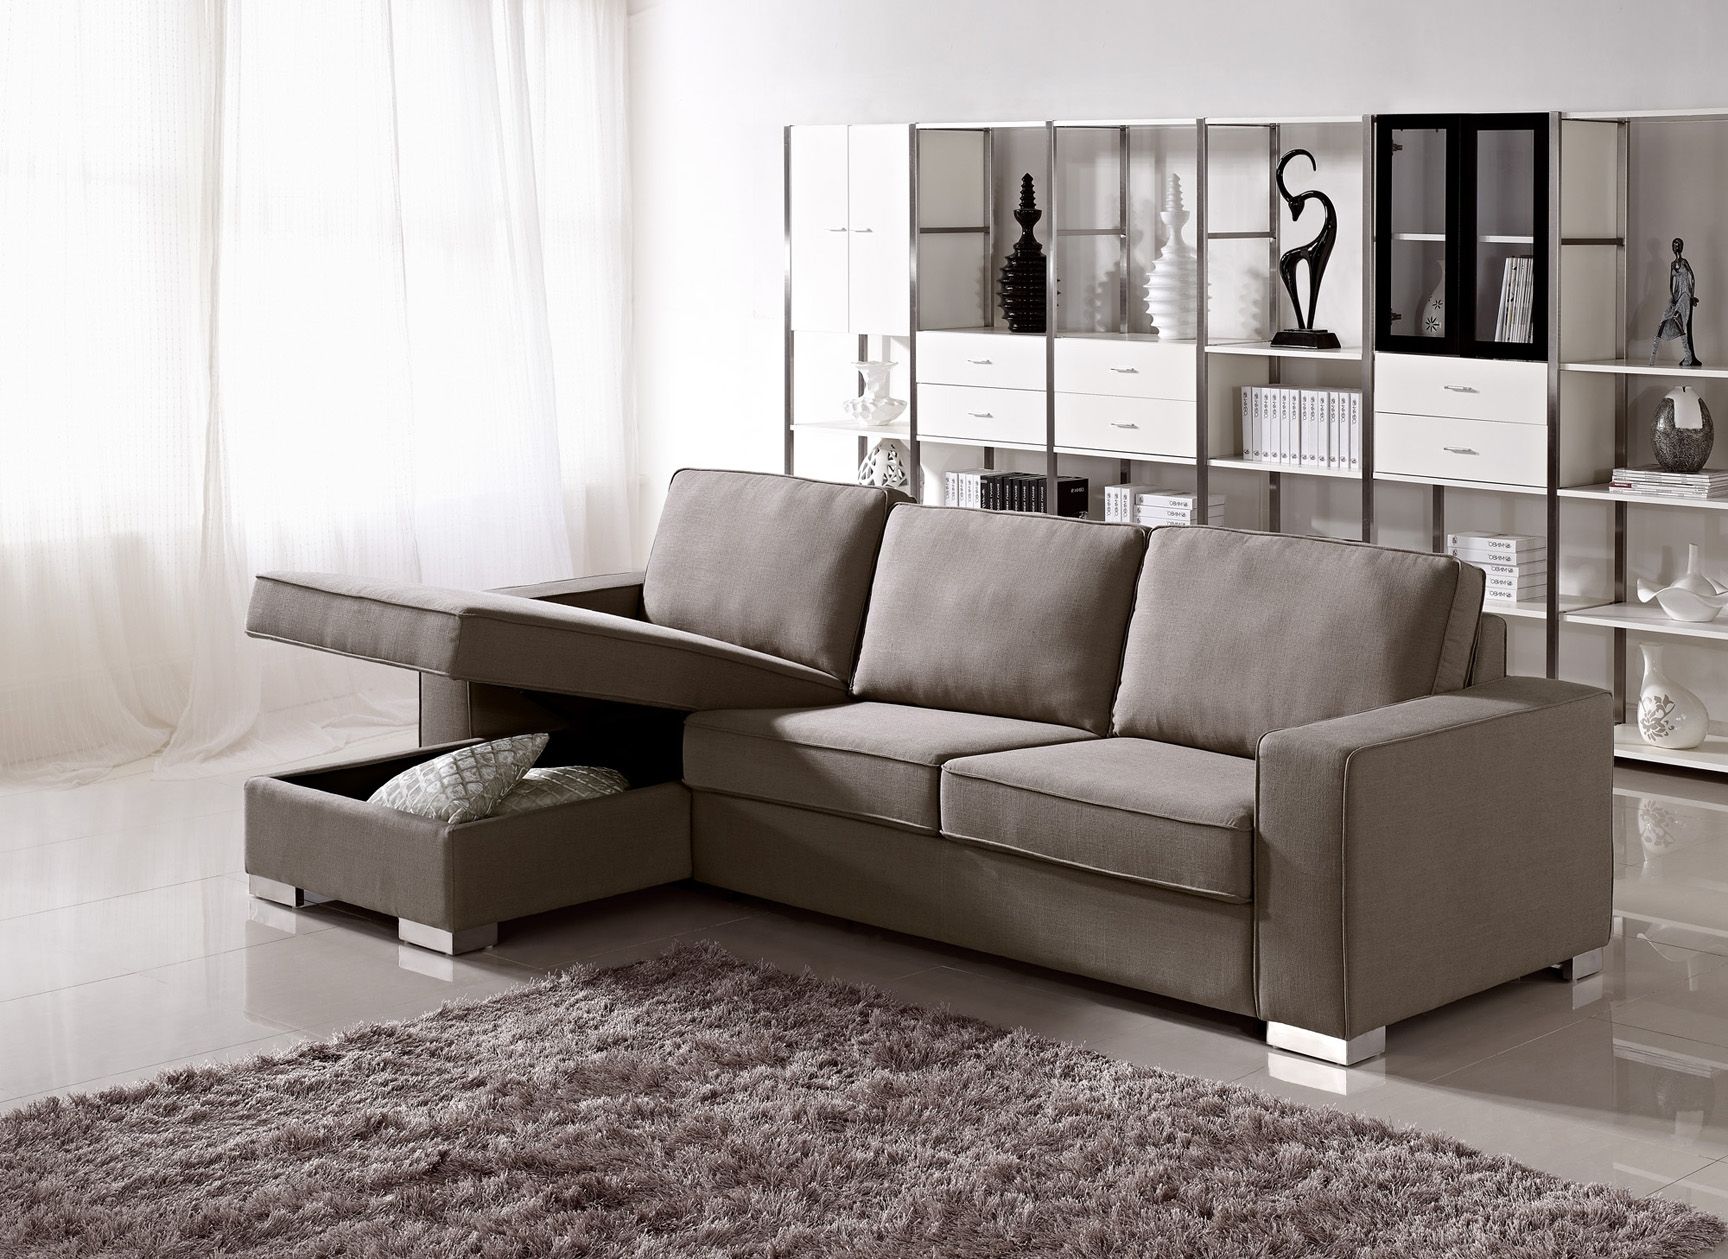 Famous Nyc Sectional Sofas Within Living Room Furniture Storage Modular Sofa With Thesofa Modern (View 2 of 20)